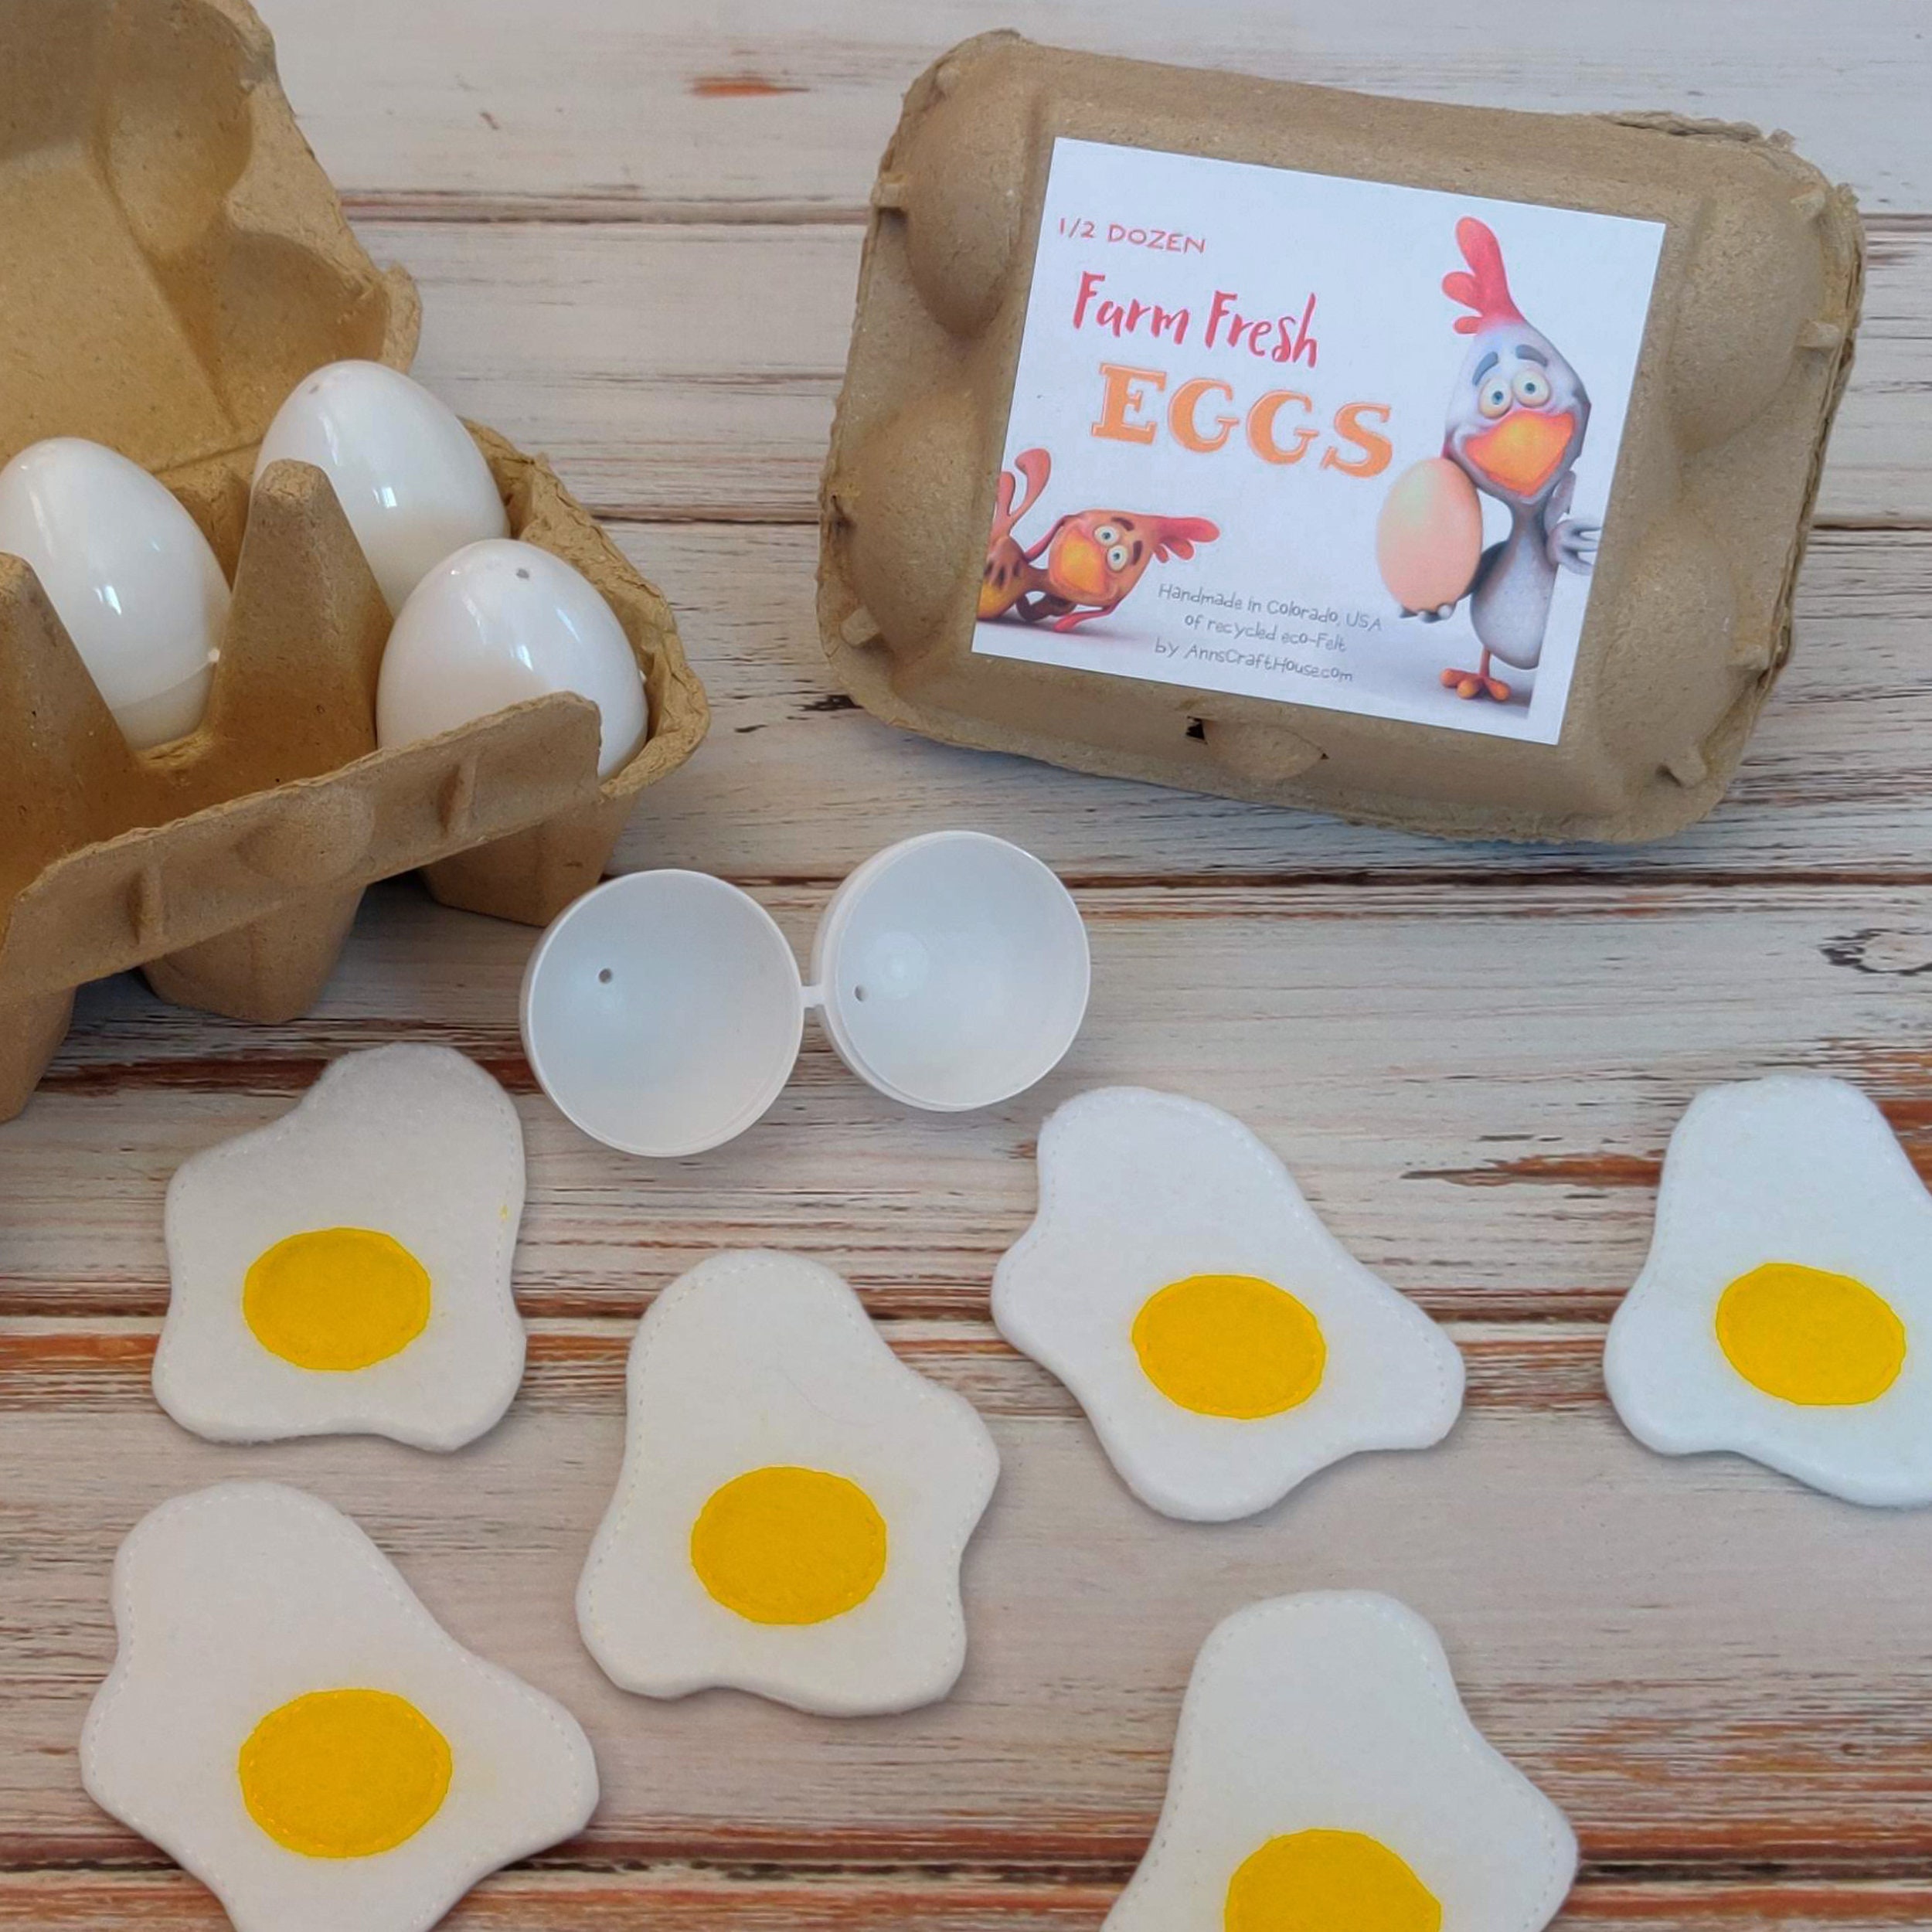 6 Wooden Fake Eggs in Carton Pretend Play Pre-school Kitchen Role Play Food Toy 